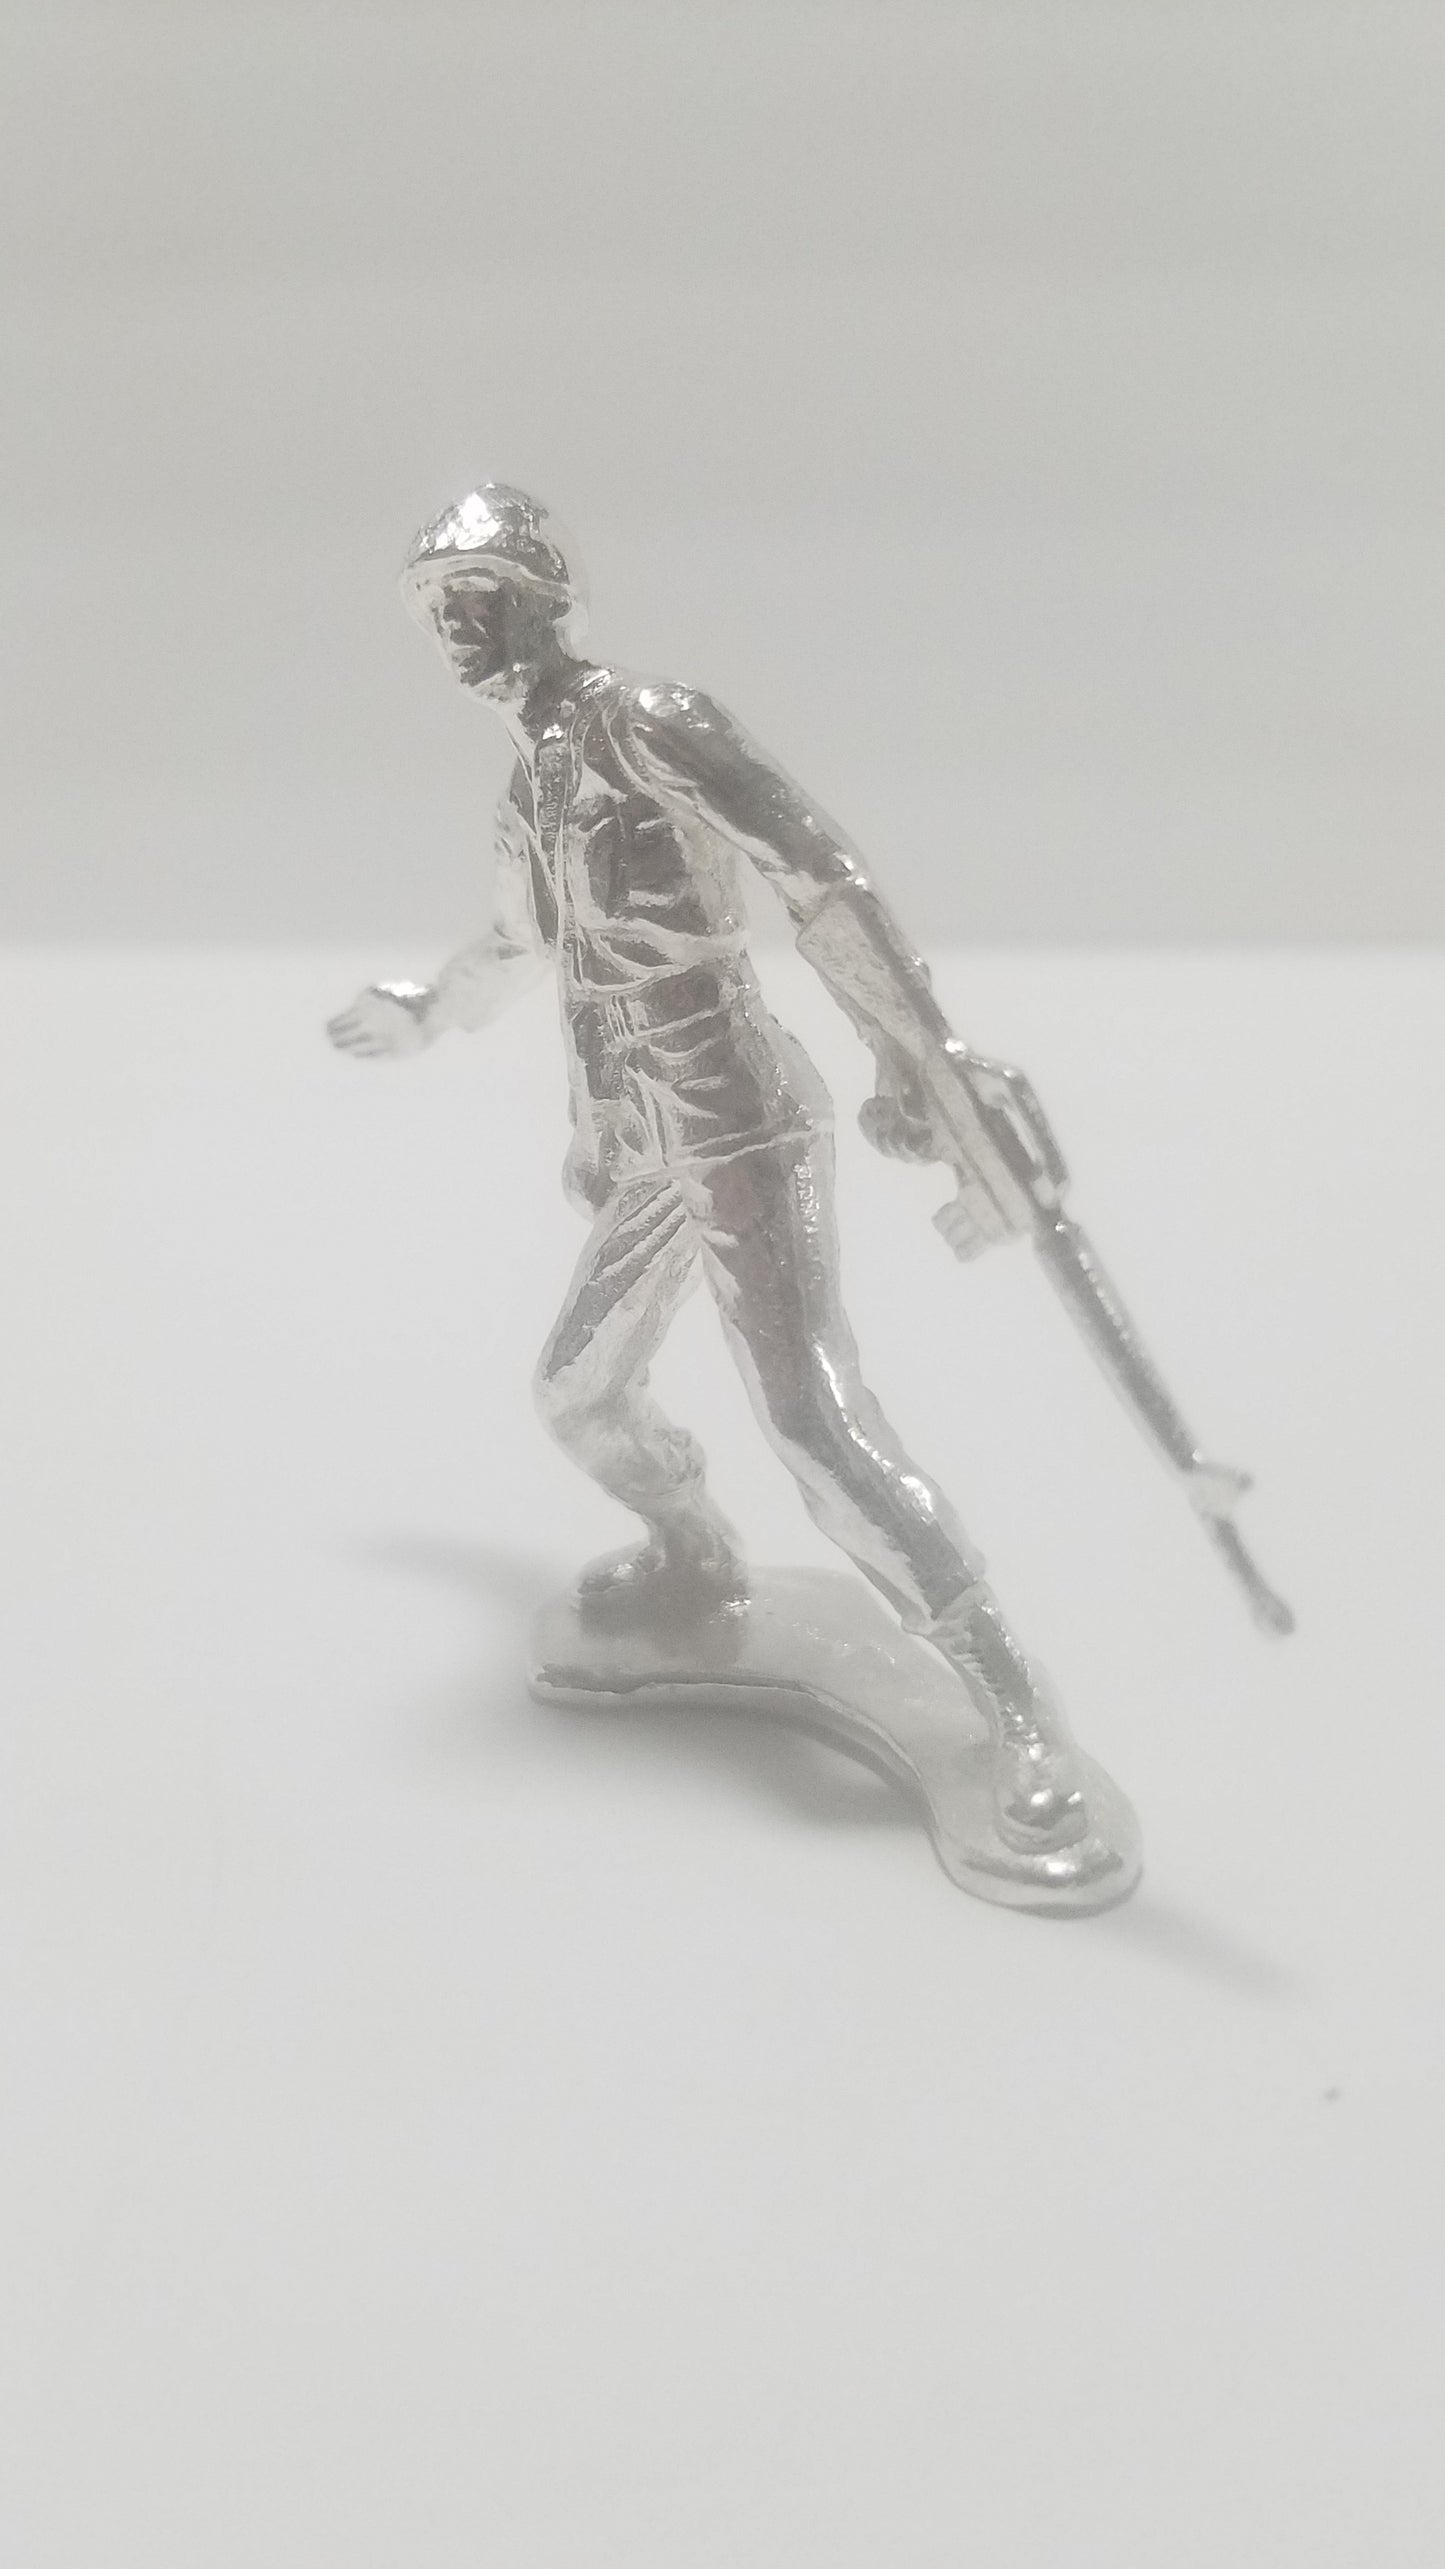 Classic Army Man Follow Me Silver Toy Soldier .999 Fine Silver